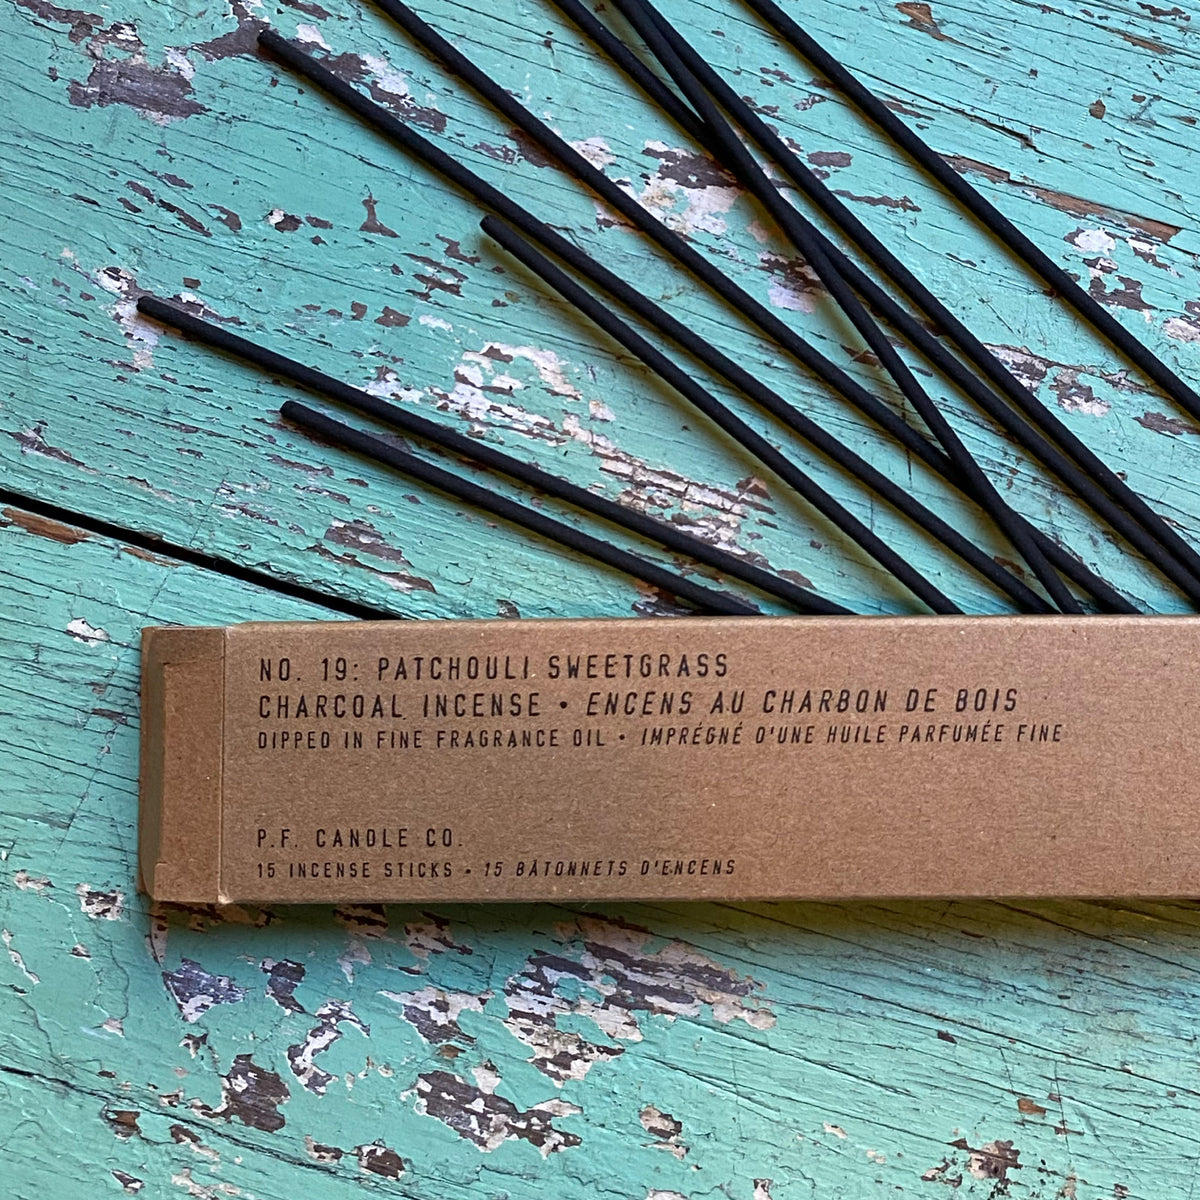 Patchouli & Sweetgrass Incense